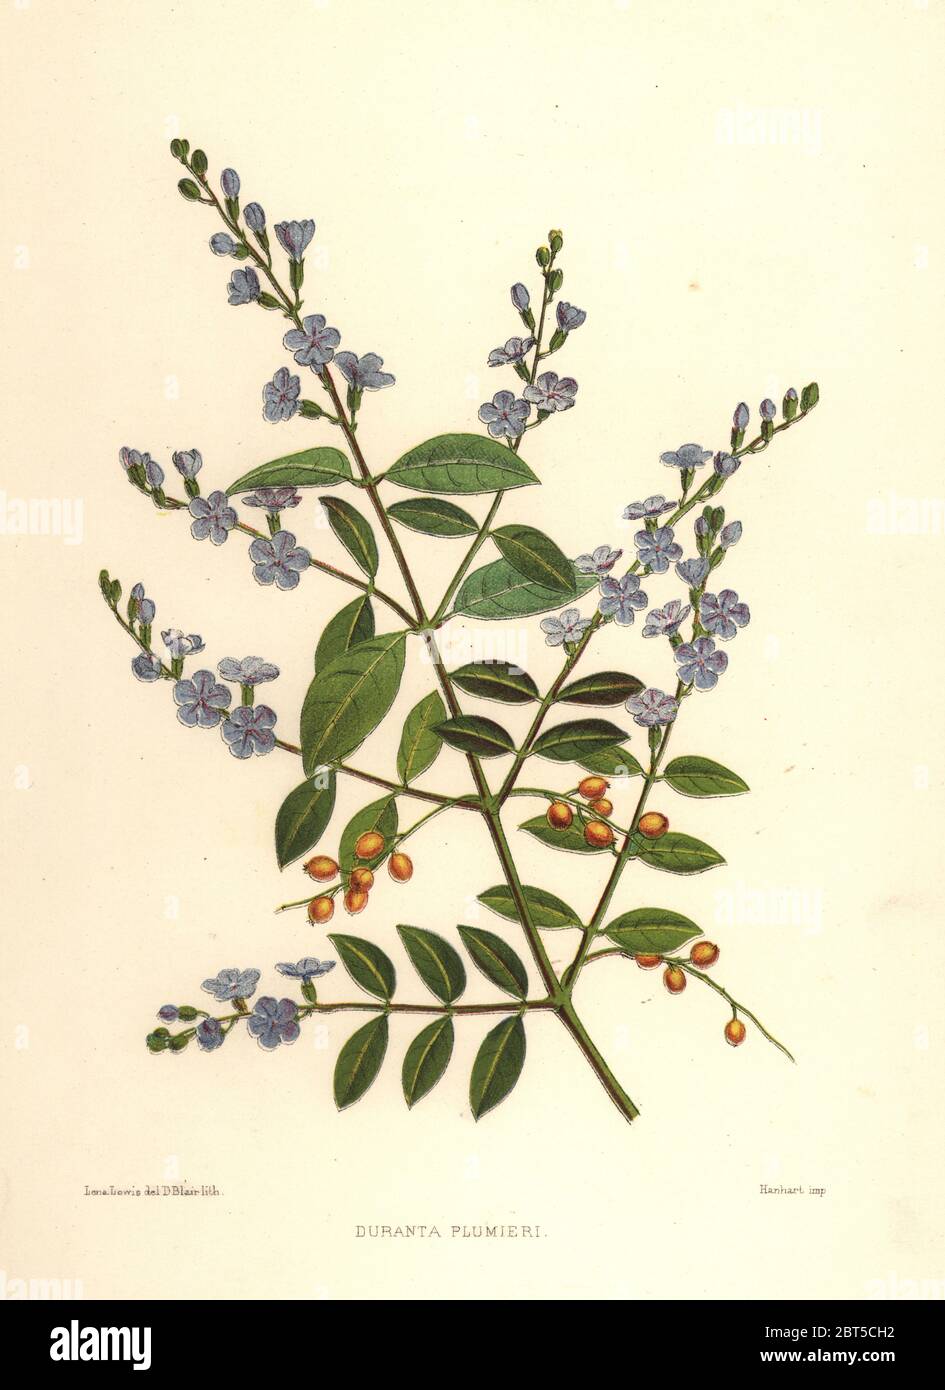 Golden dewdrop, pigeon berry or skyflower, Duranta erecta (Duranta plumieri). Handcoloured lithograph by D. Blair after an illustration by Lena Lowis from her Familiar Indian Flowers with Coloured Plates, L. Reeve, London, 1878. Lena Lowis, formerly Selena Caroline Shakespear (1845-1919), was a British woman artist who traveled to India with her husband Lt.-Col. Ninian Lowis. Stock Photo